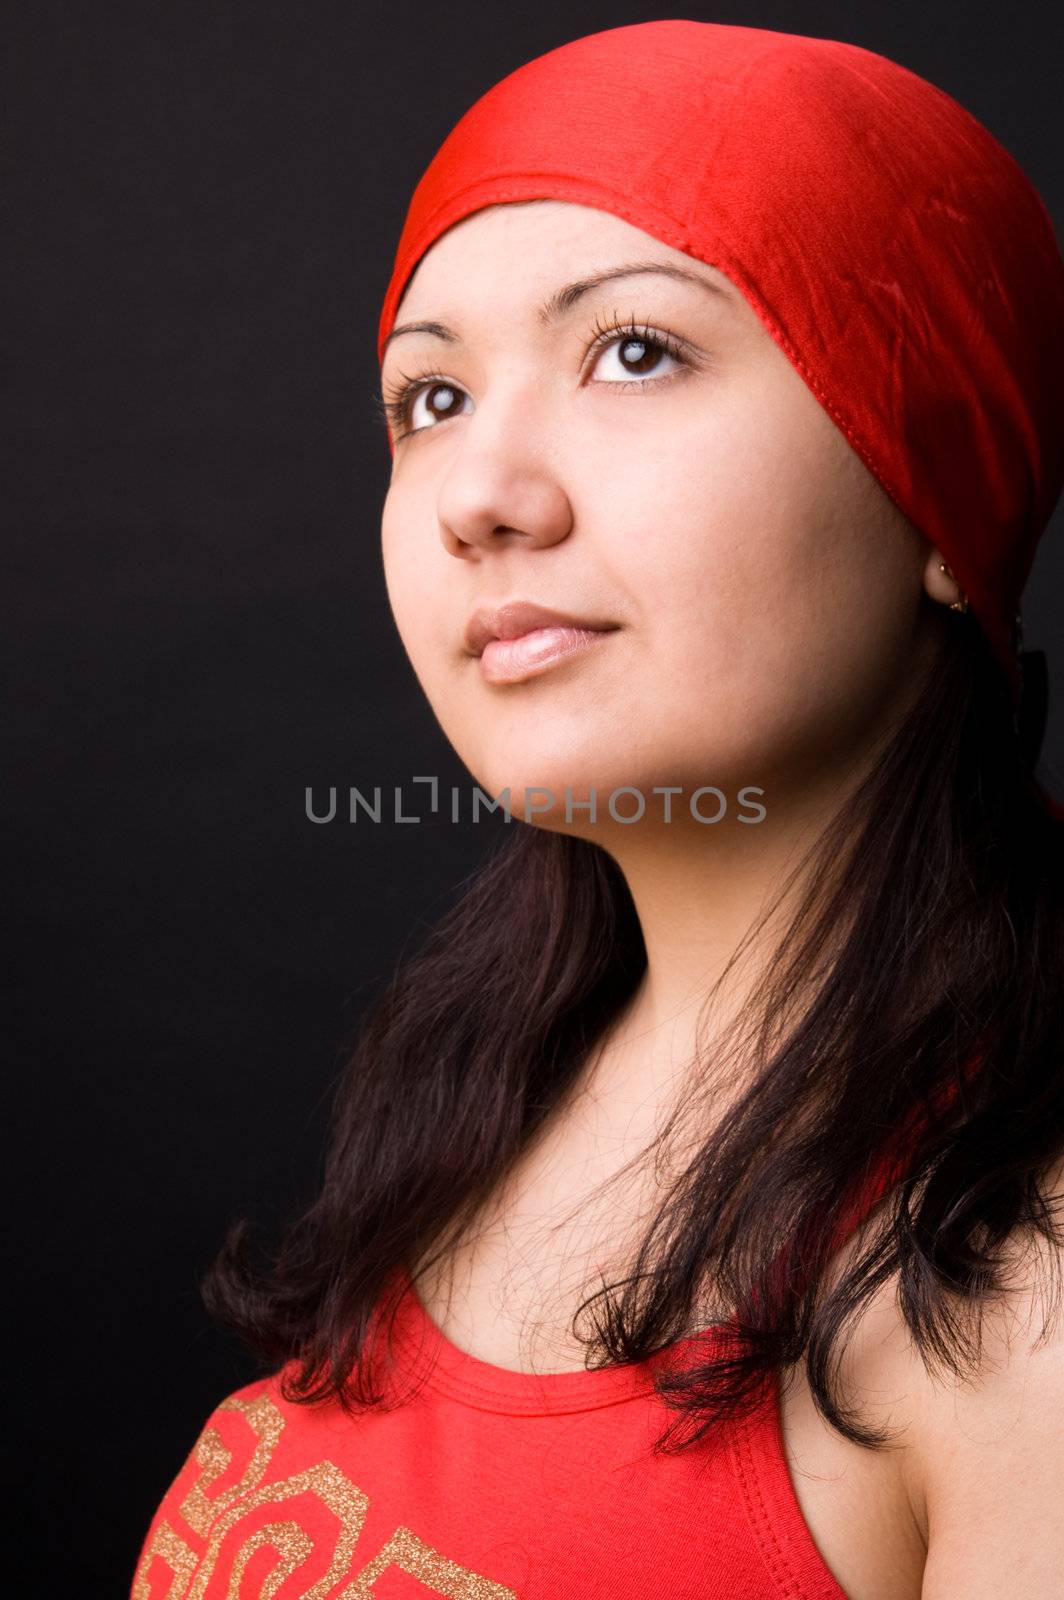 The girl in a red scarf by andyphoto